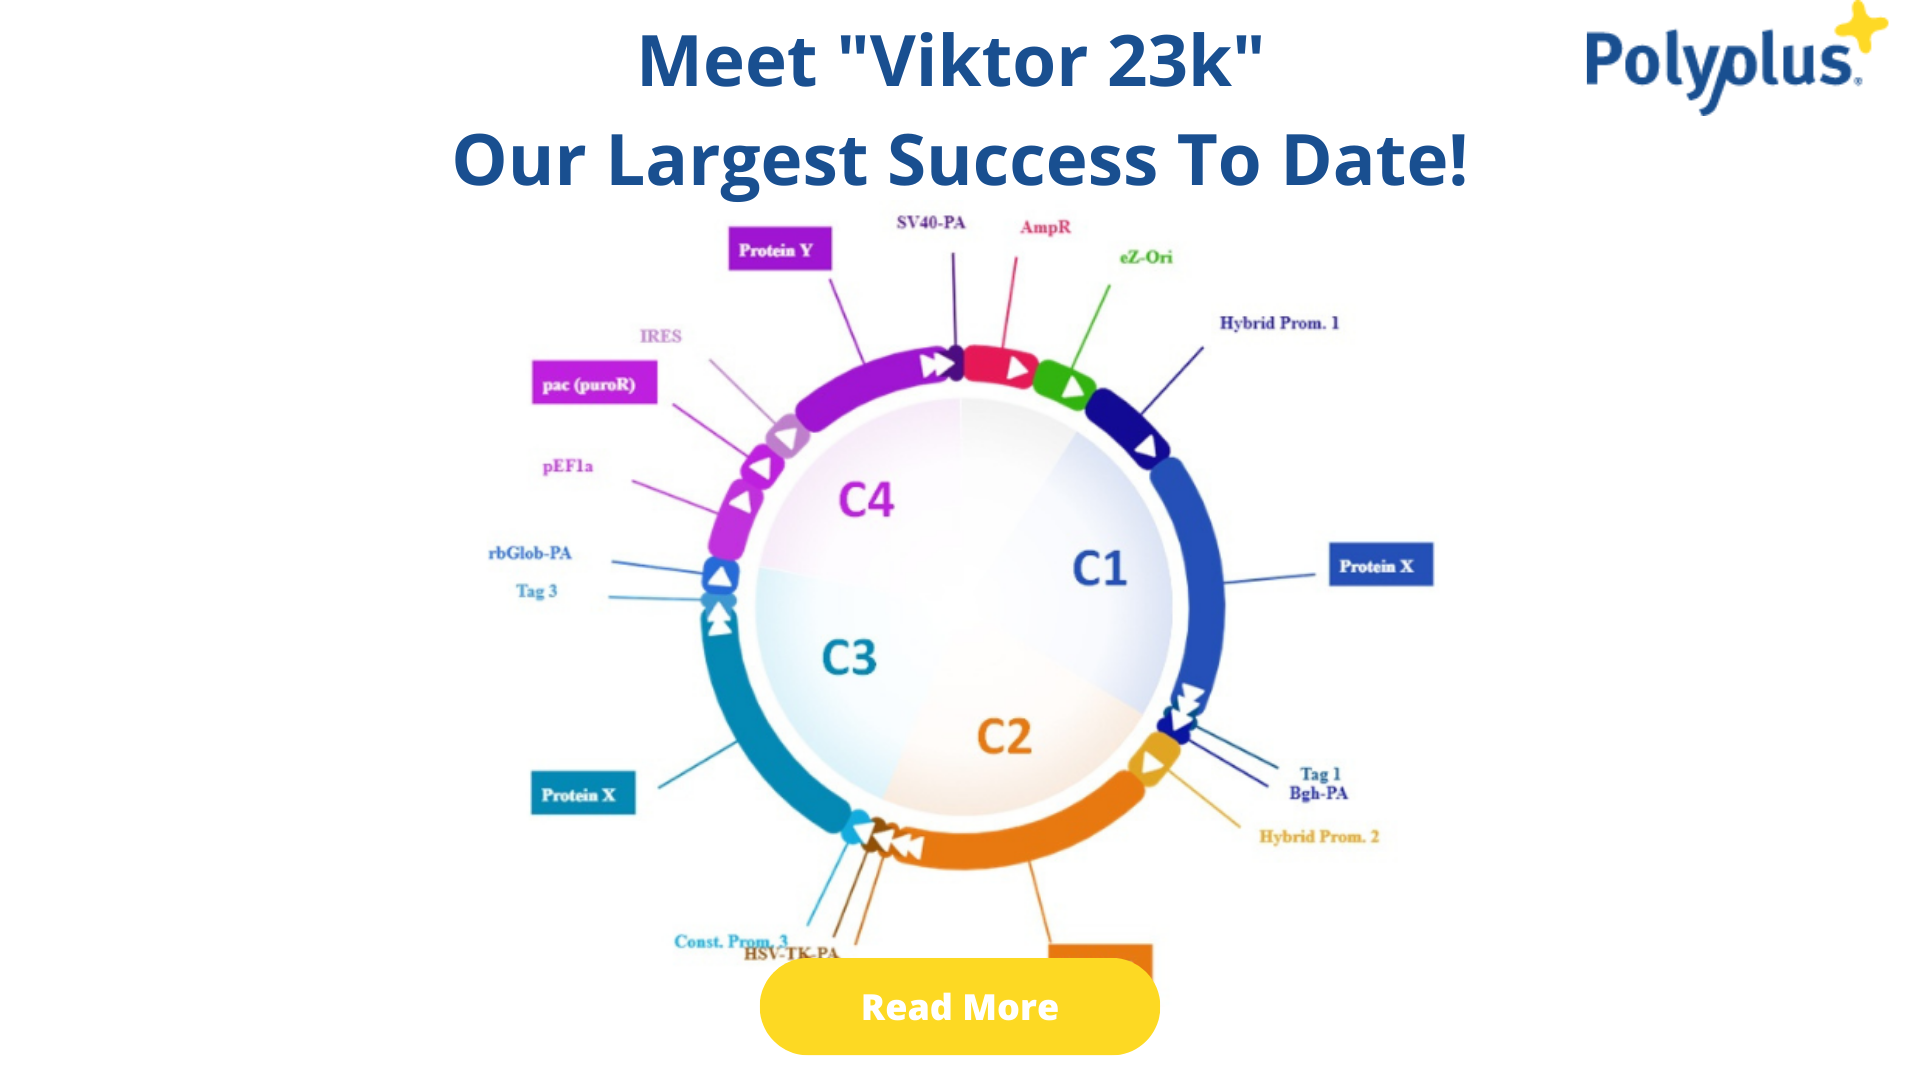 Meet “Viktor 23k” Our Largest Success To Date!